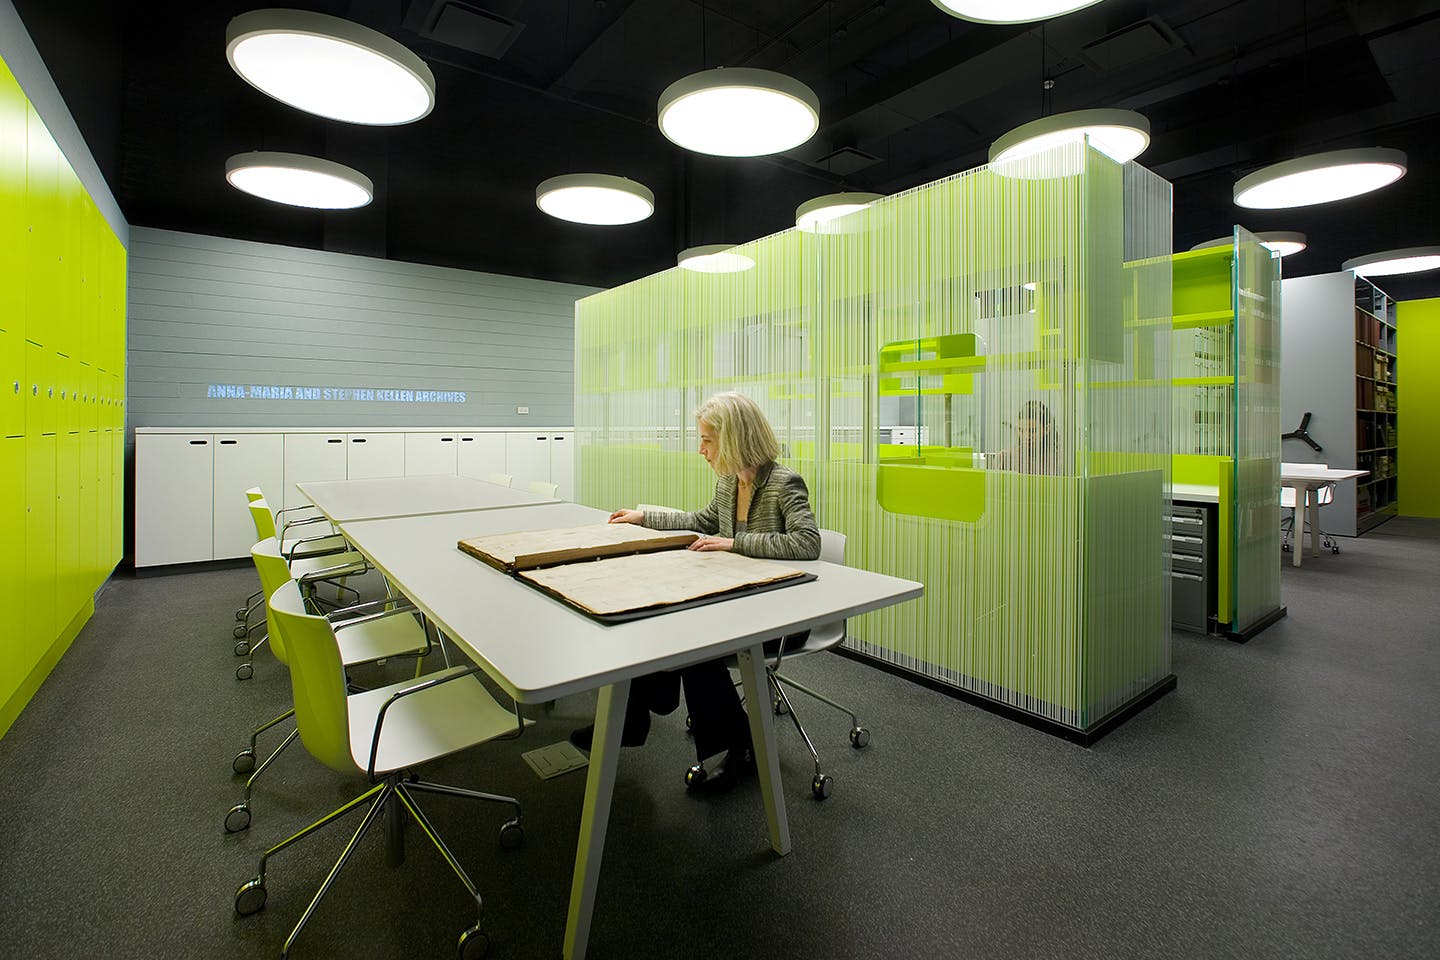 Person in a grey jacket looks at archival work on a table in a room decorated in chartreuse lockers, chairs, and desk spaces